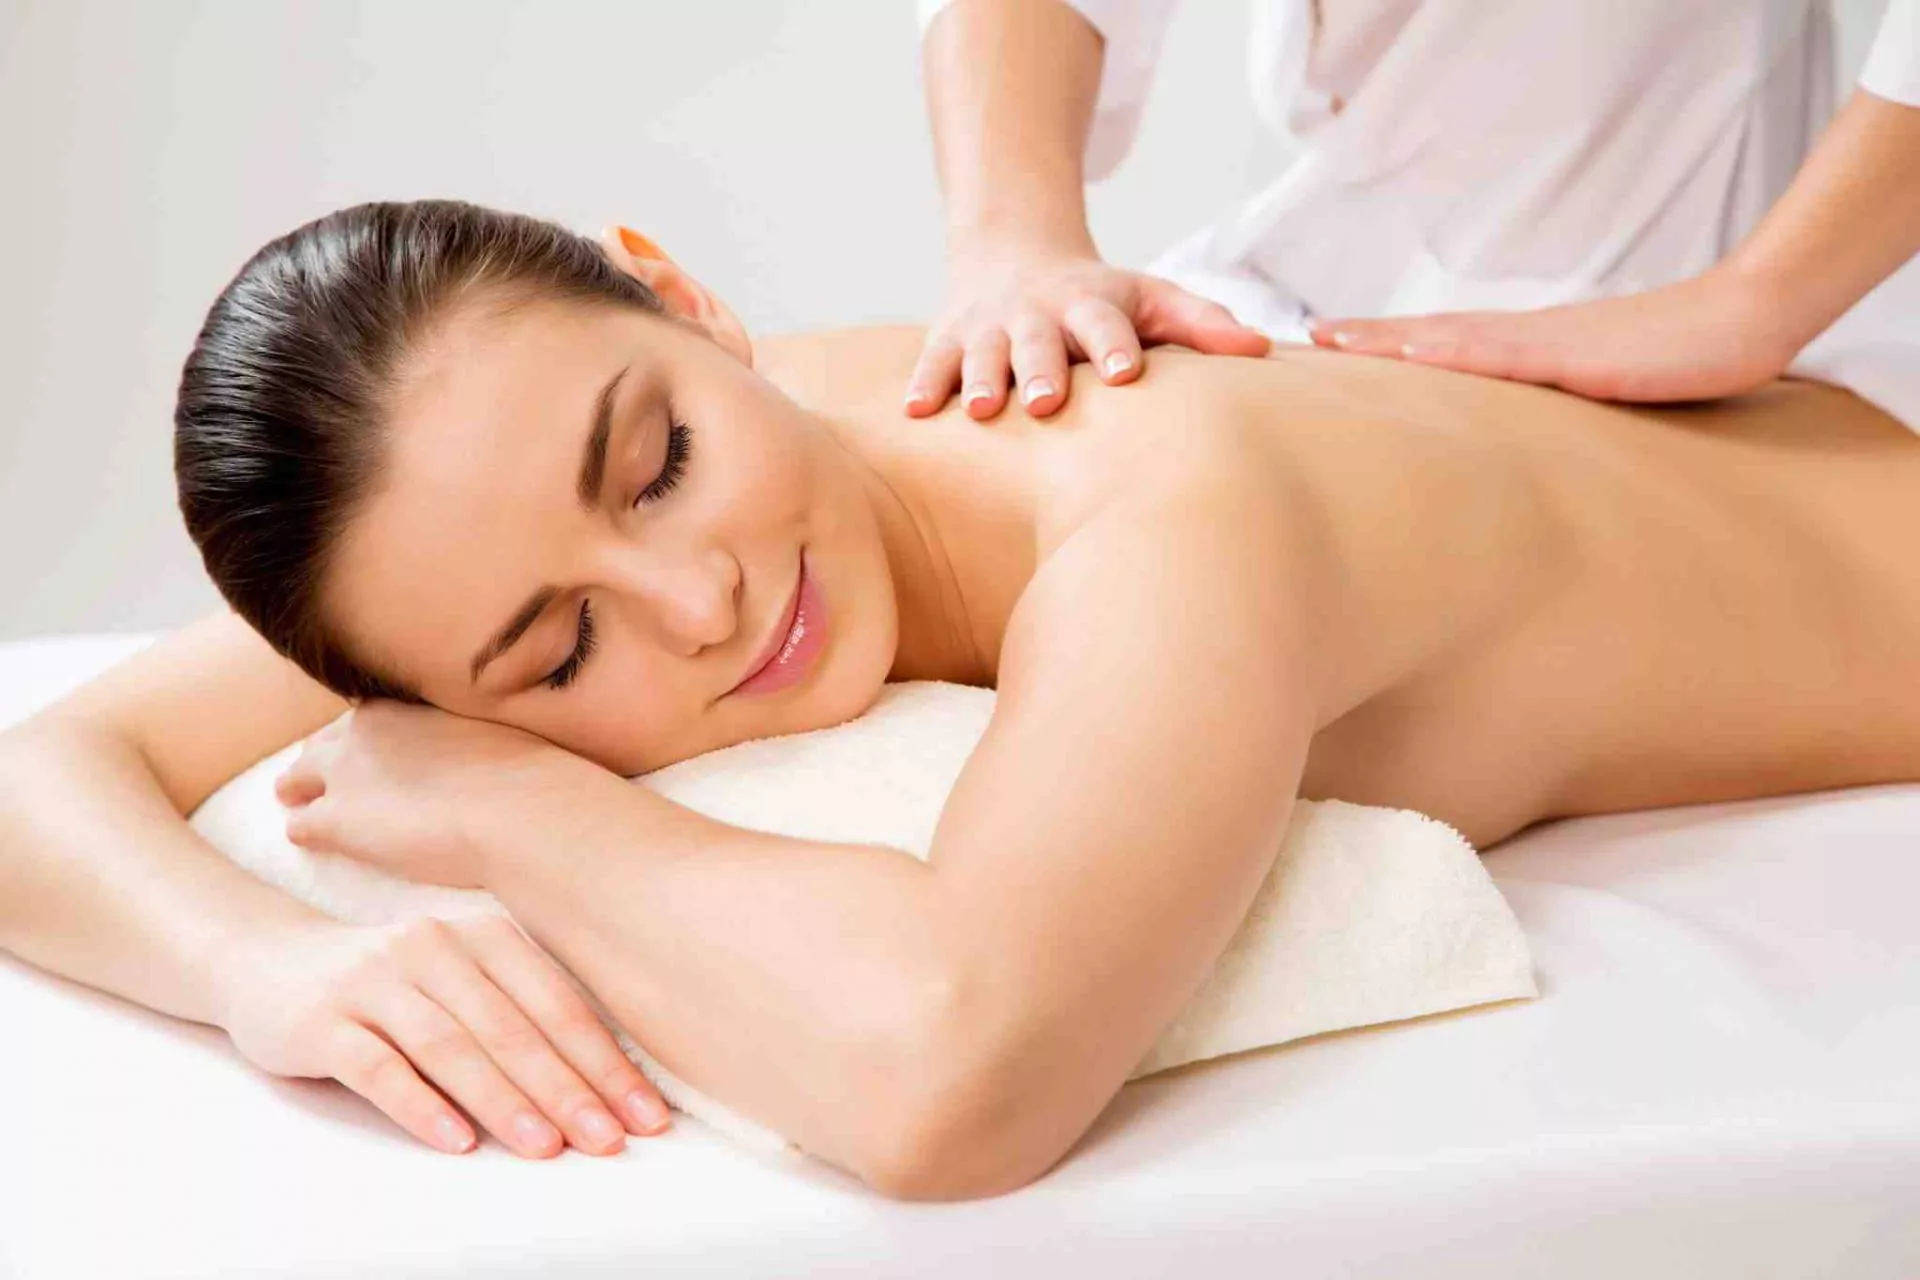 7 Great Reasons to Have a Massage